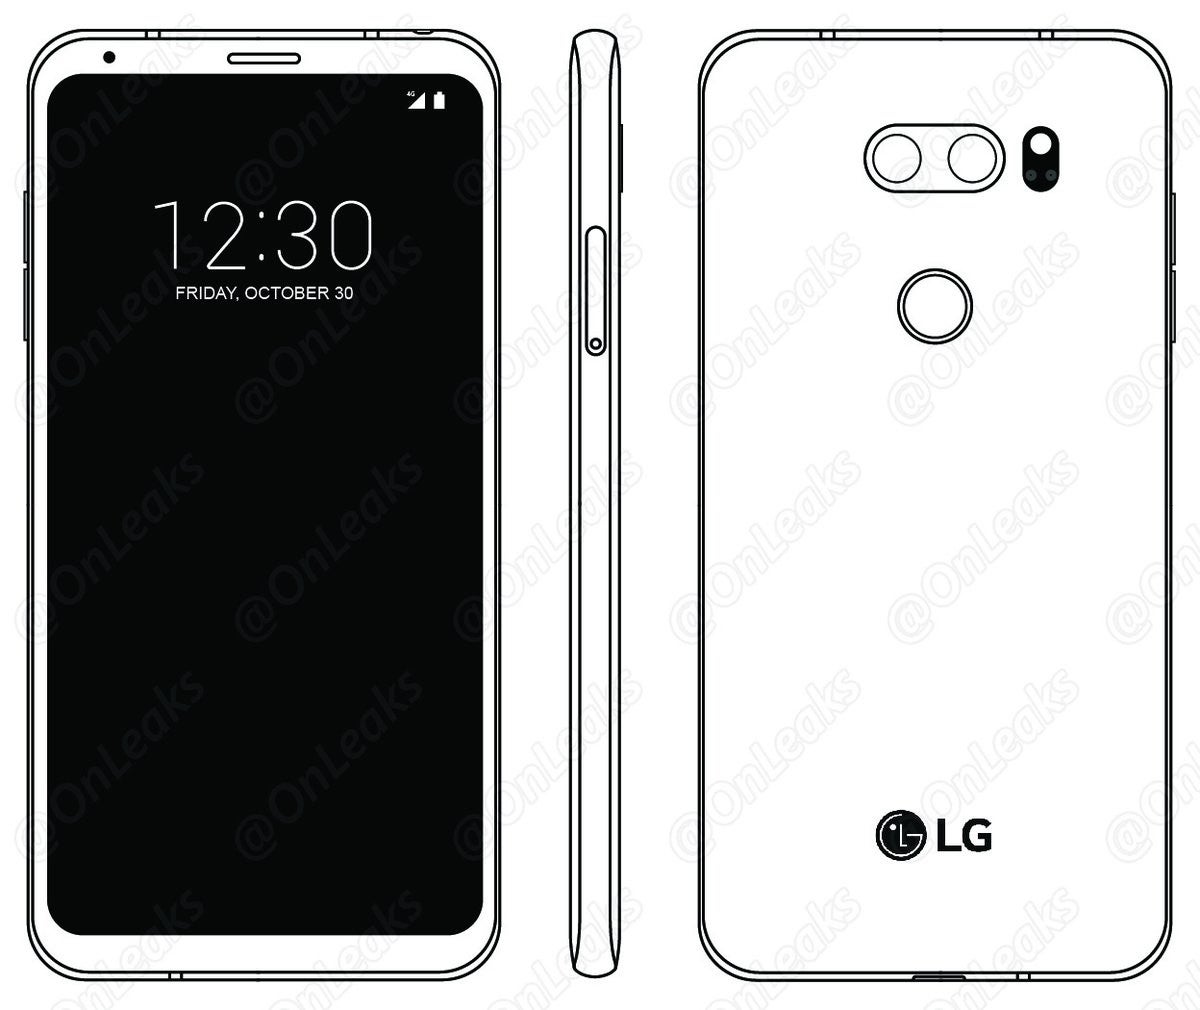 LG V30 as reportedly seen in the phone's manual - LG V30 schematic leaks: Dual rear camera remains a staple, but no sign of a secondary display